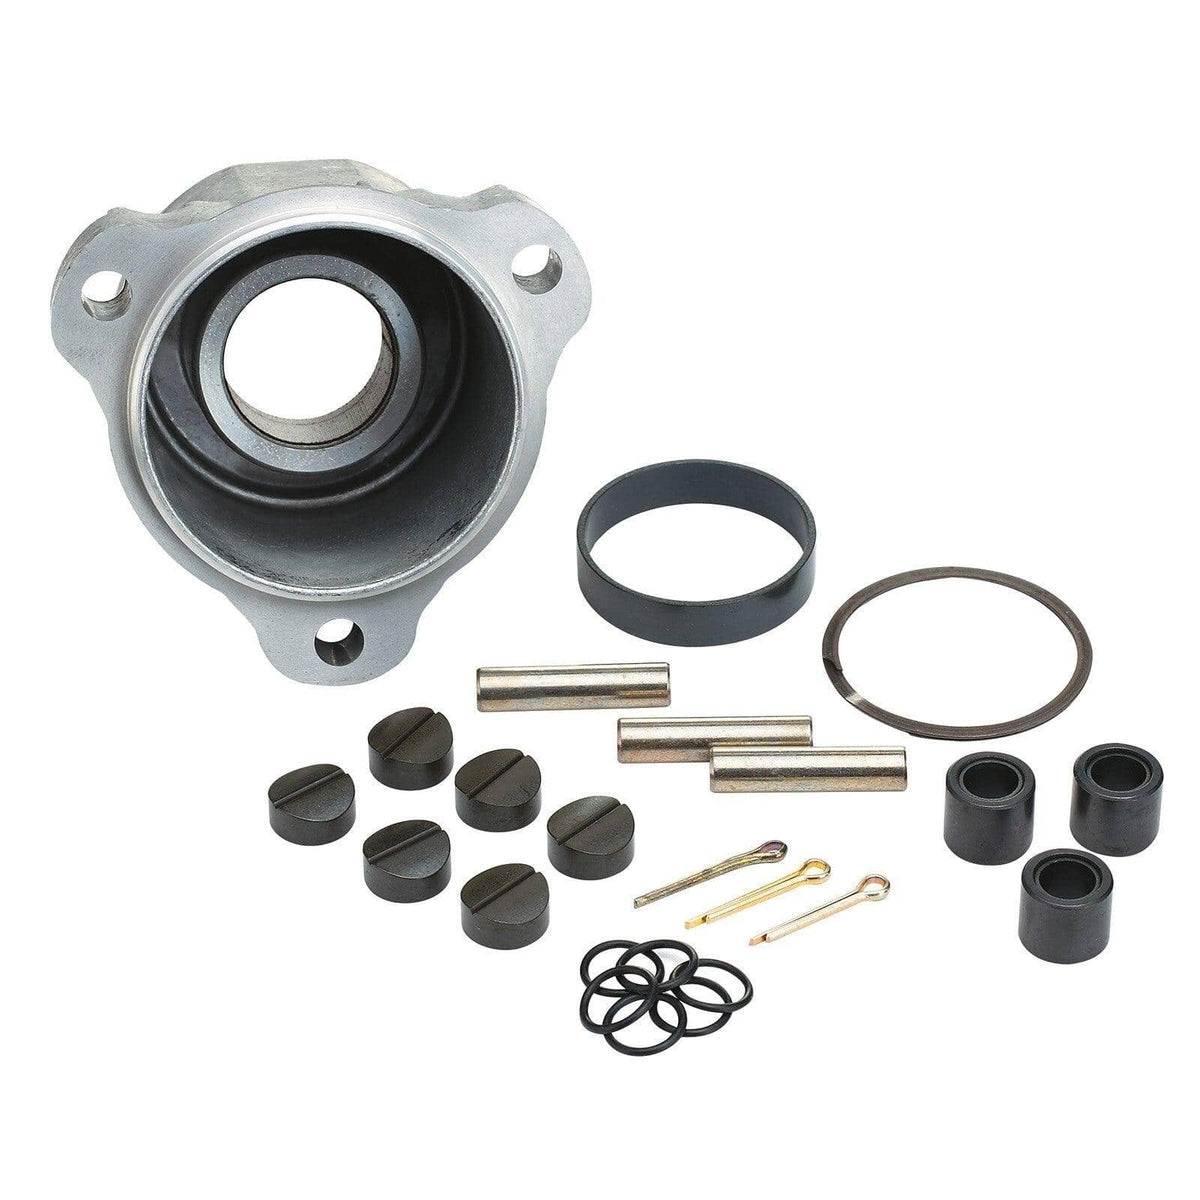 Maintenance Kit for TRA Drive Pulley - 2012 (1200), 2012 to 2018 (600 E-TEC high altitude), 2013 to 2019 Tundra Xtreme - Factory Recreation